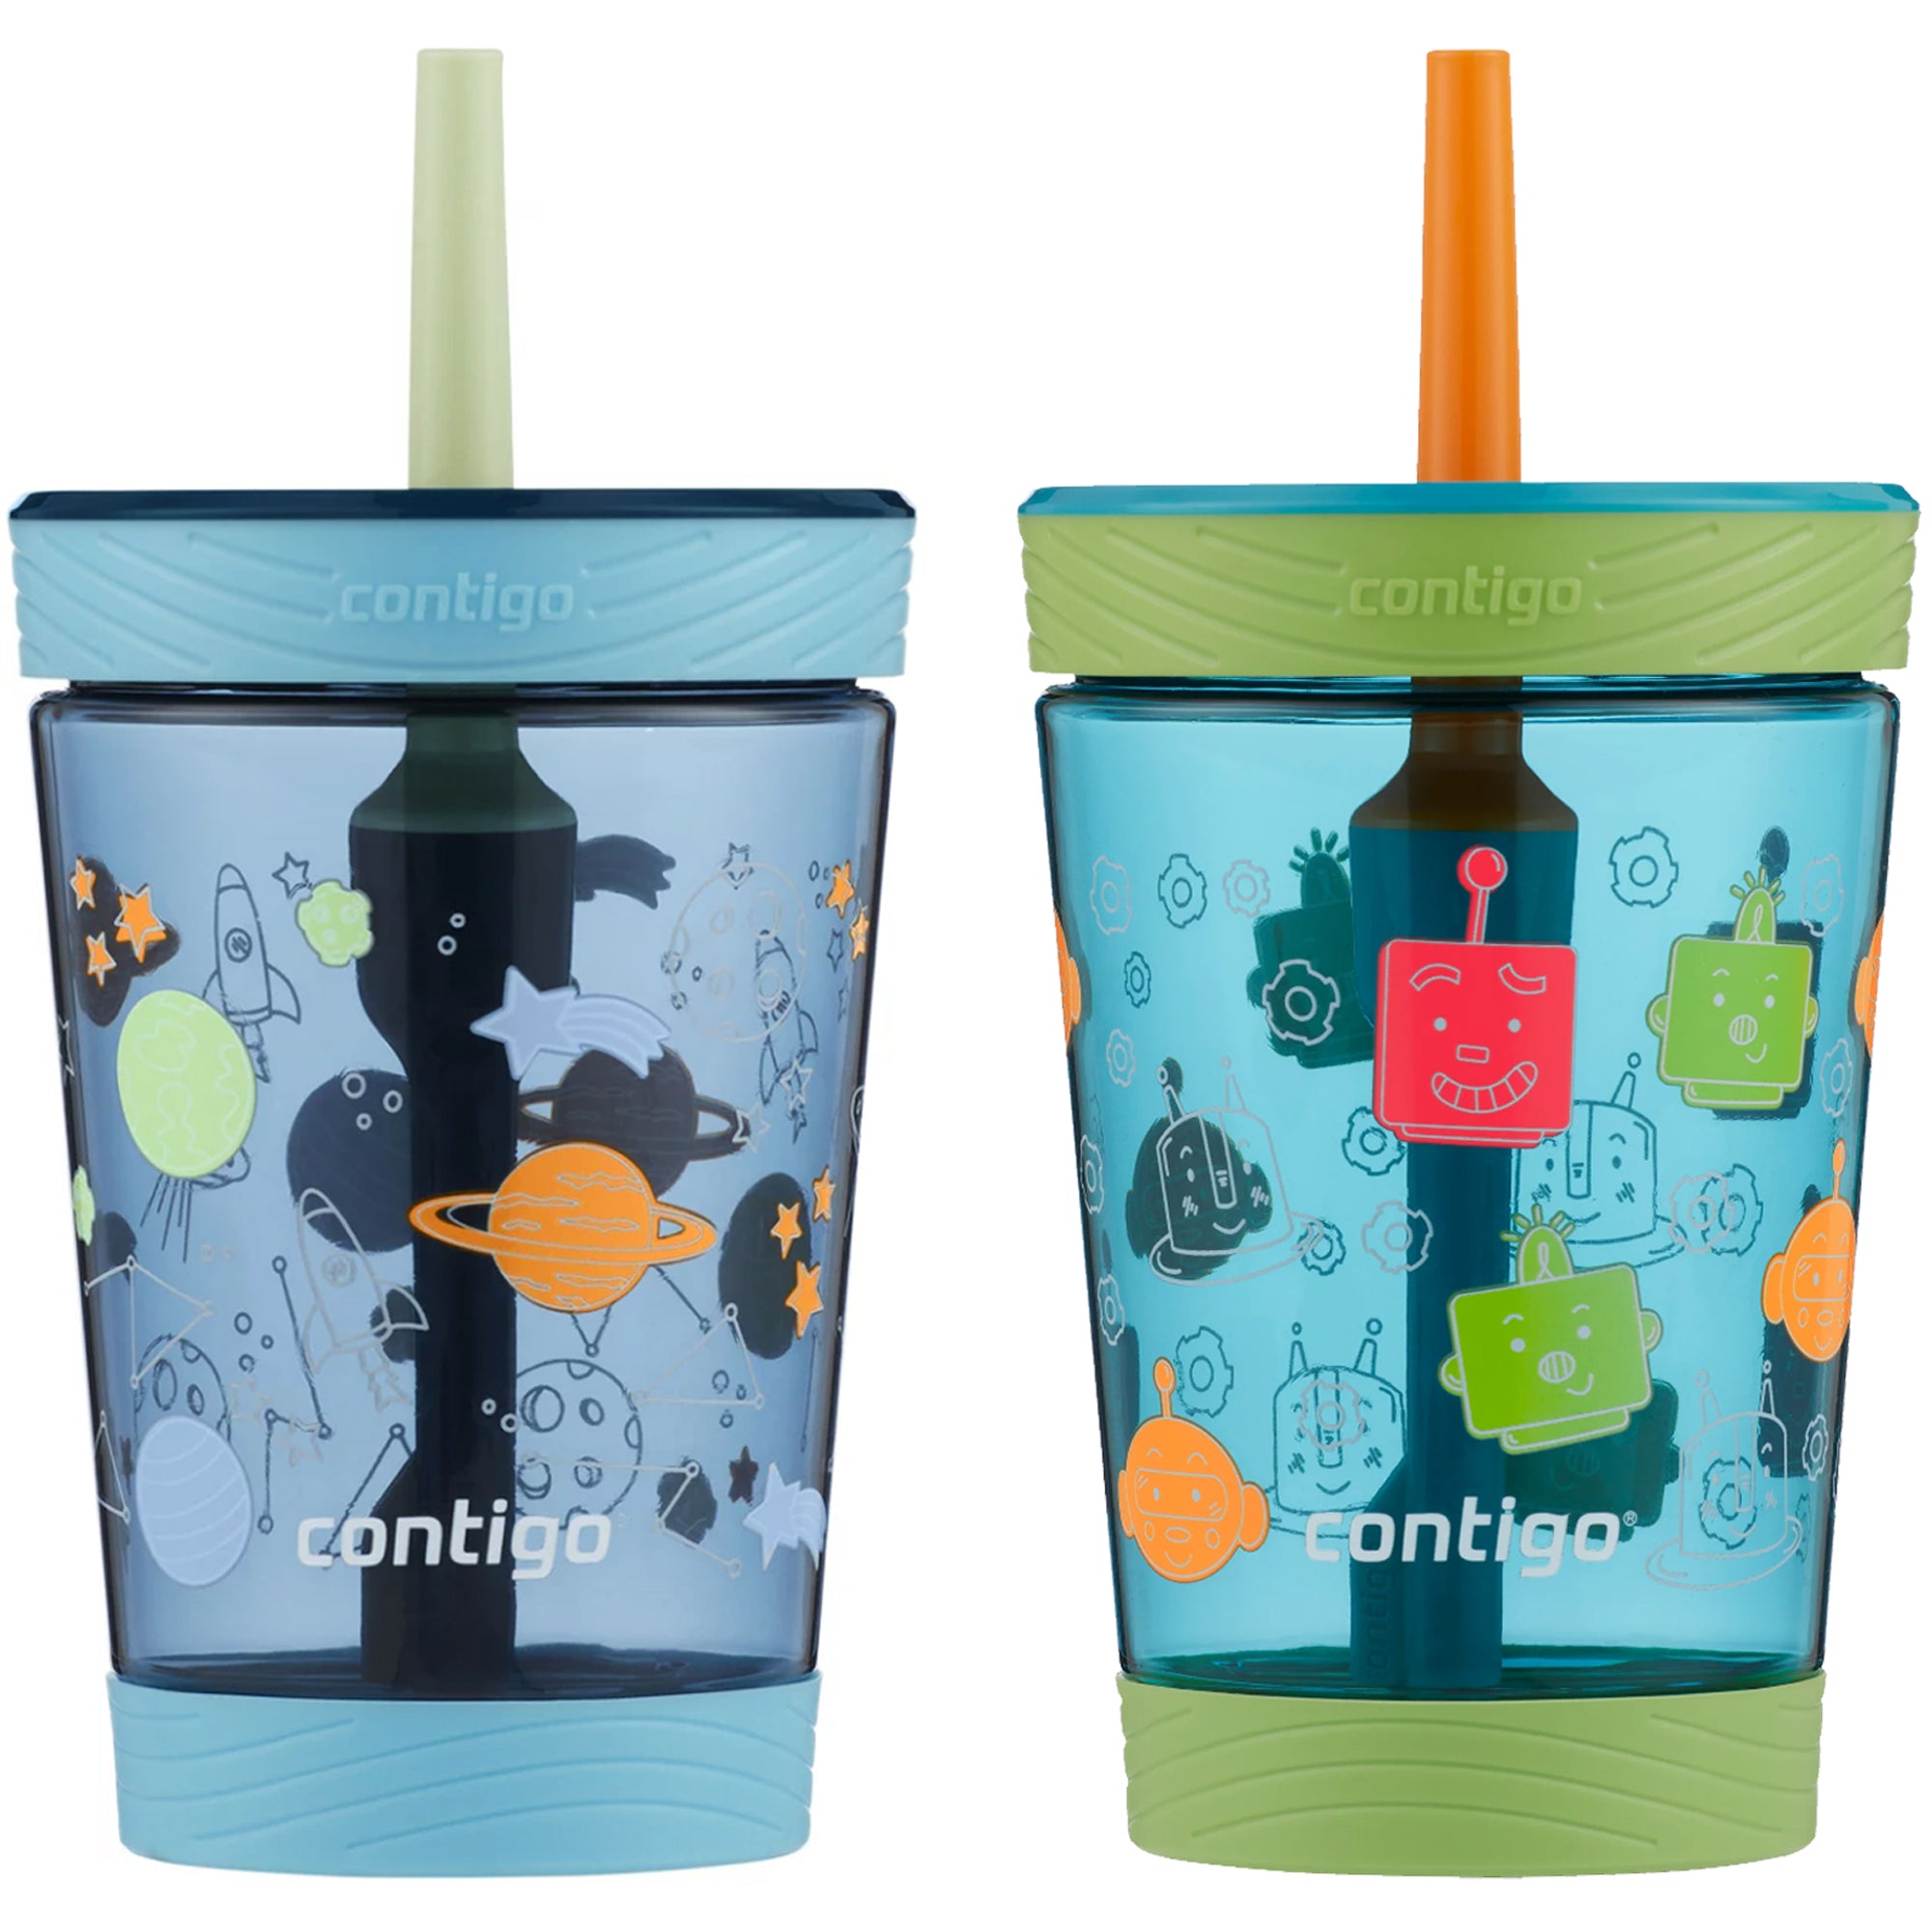 Contigo Kids Spill-Proof Stainless Steel 12oz Tumbler with Straw and  Thermalock Lid Blue Raspberry Cosmos